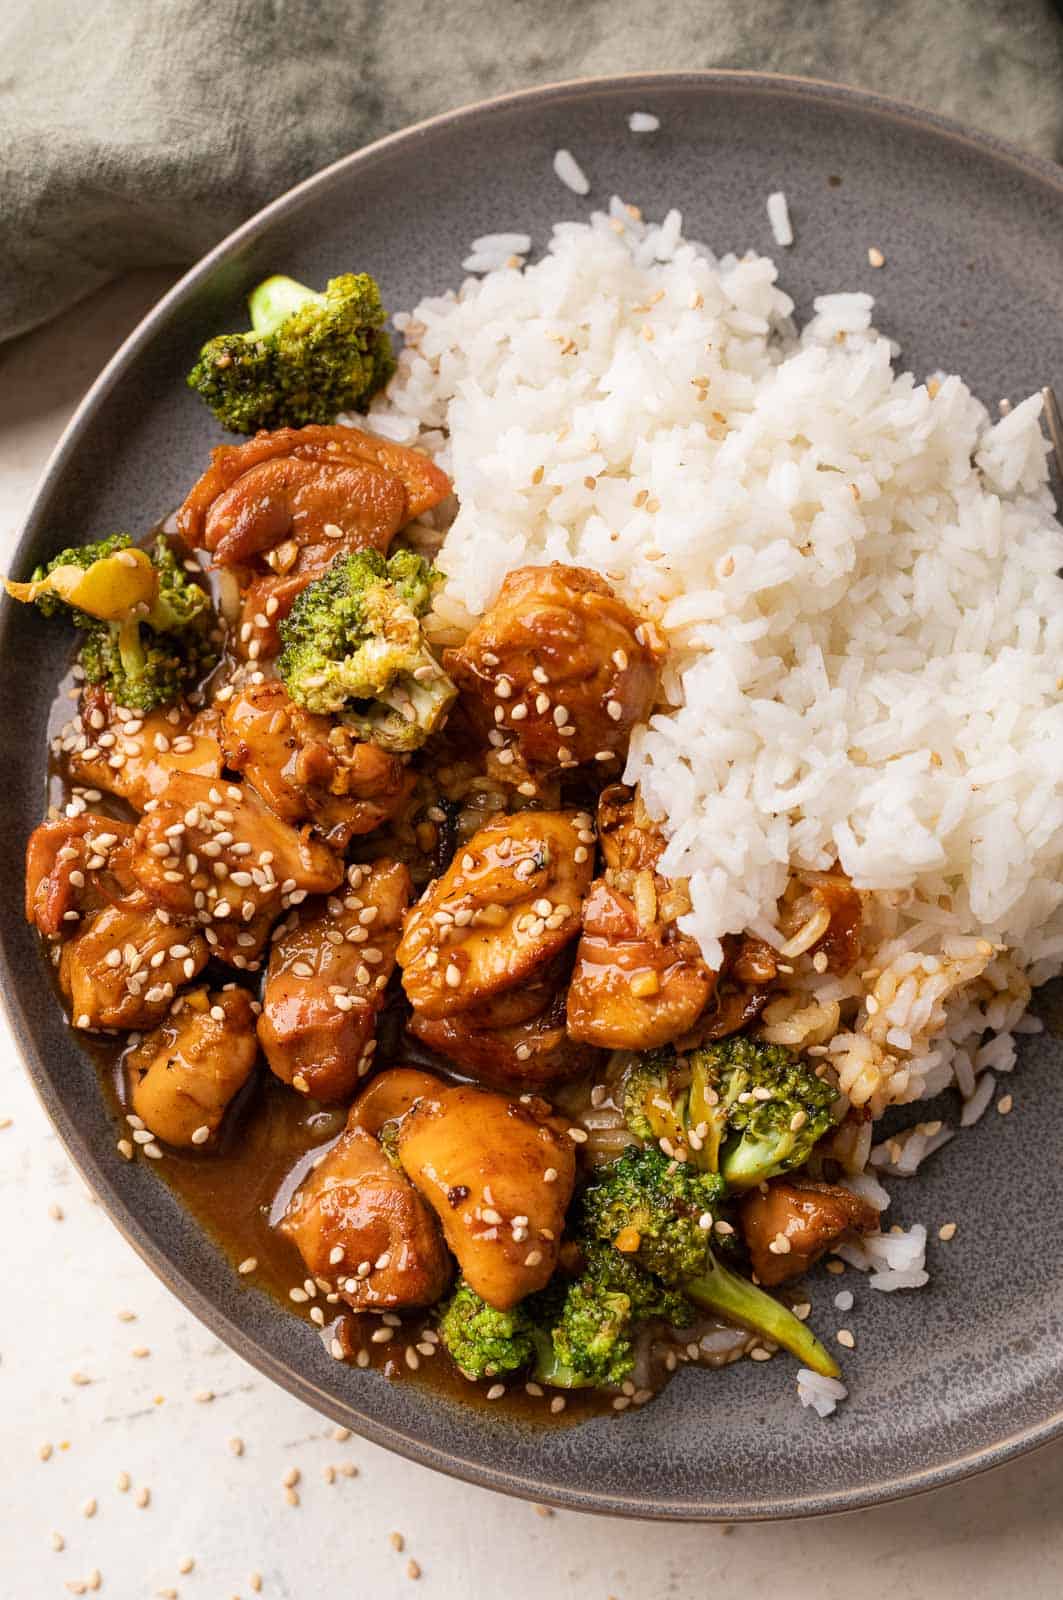 Teriyaki Chicken served on a plate with rice on the side